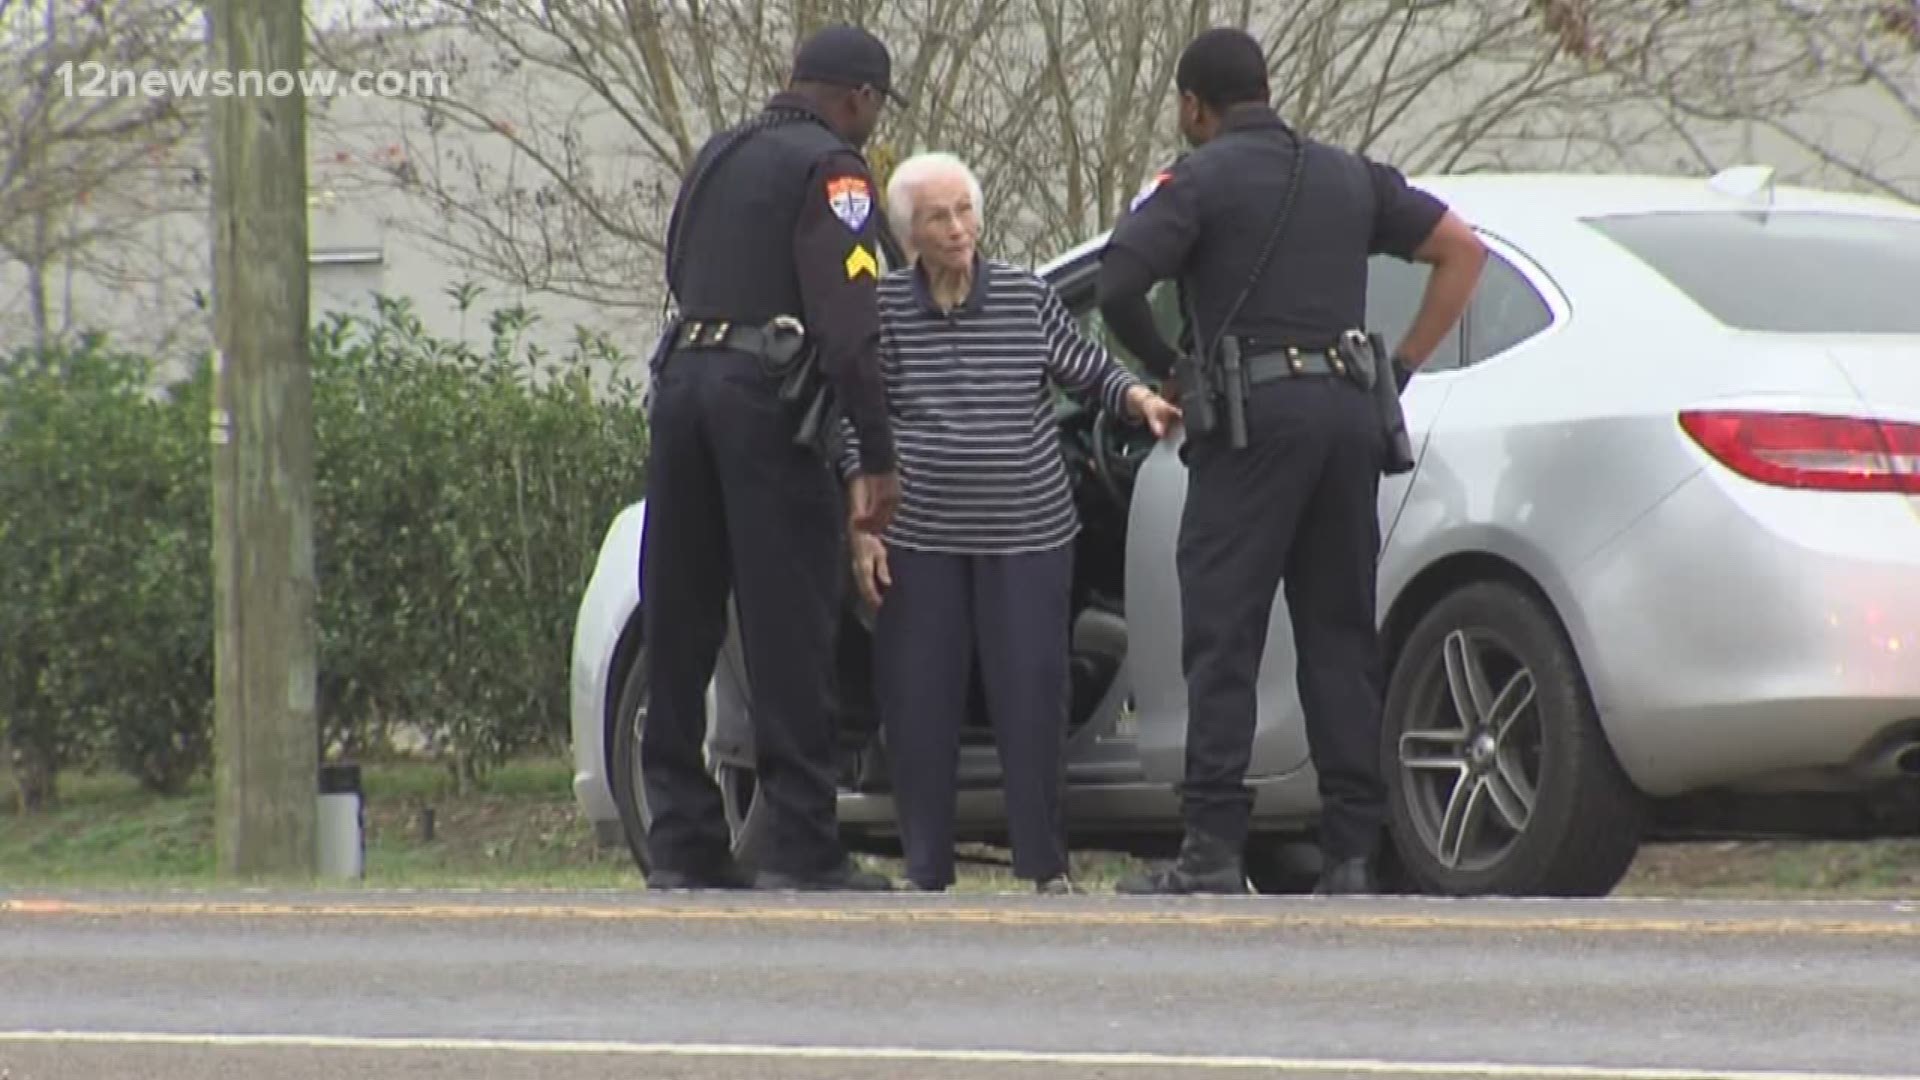 A deputy tried to pull the 96-year-old woman over for not staying in one lane. After a short stand off, she told police she didn't know they were following her.